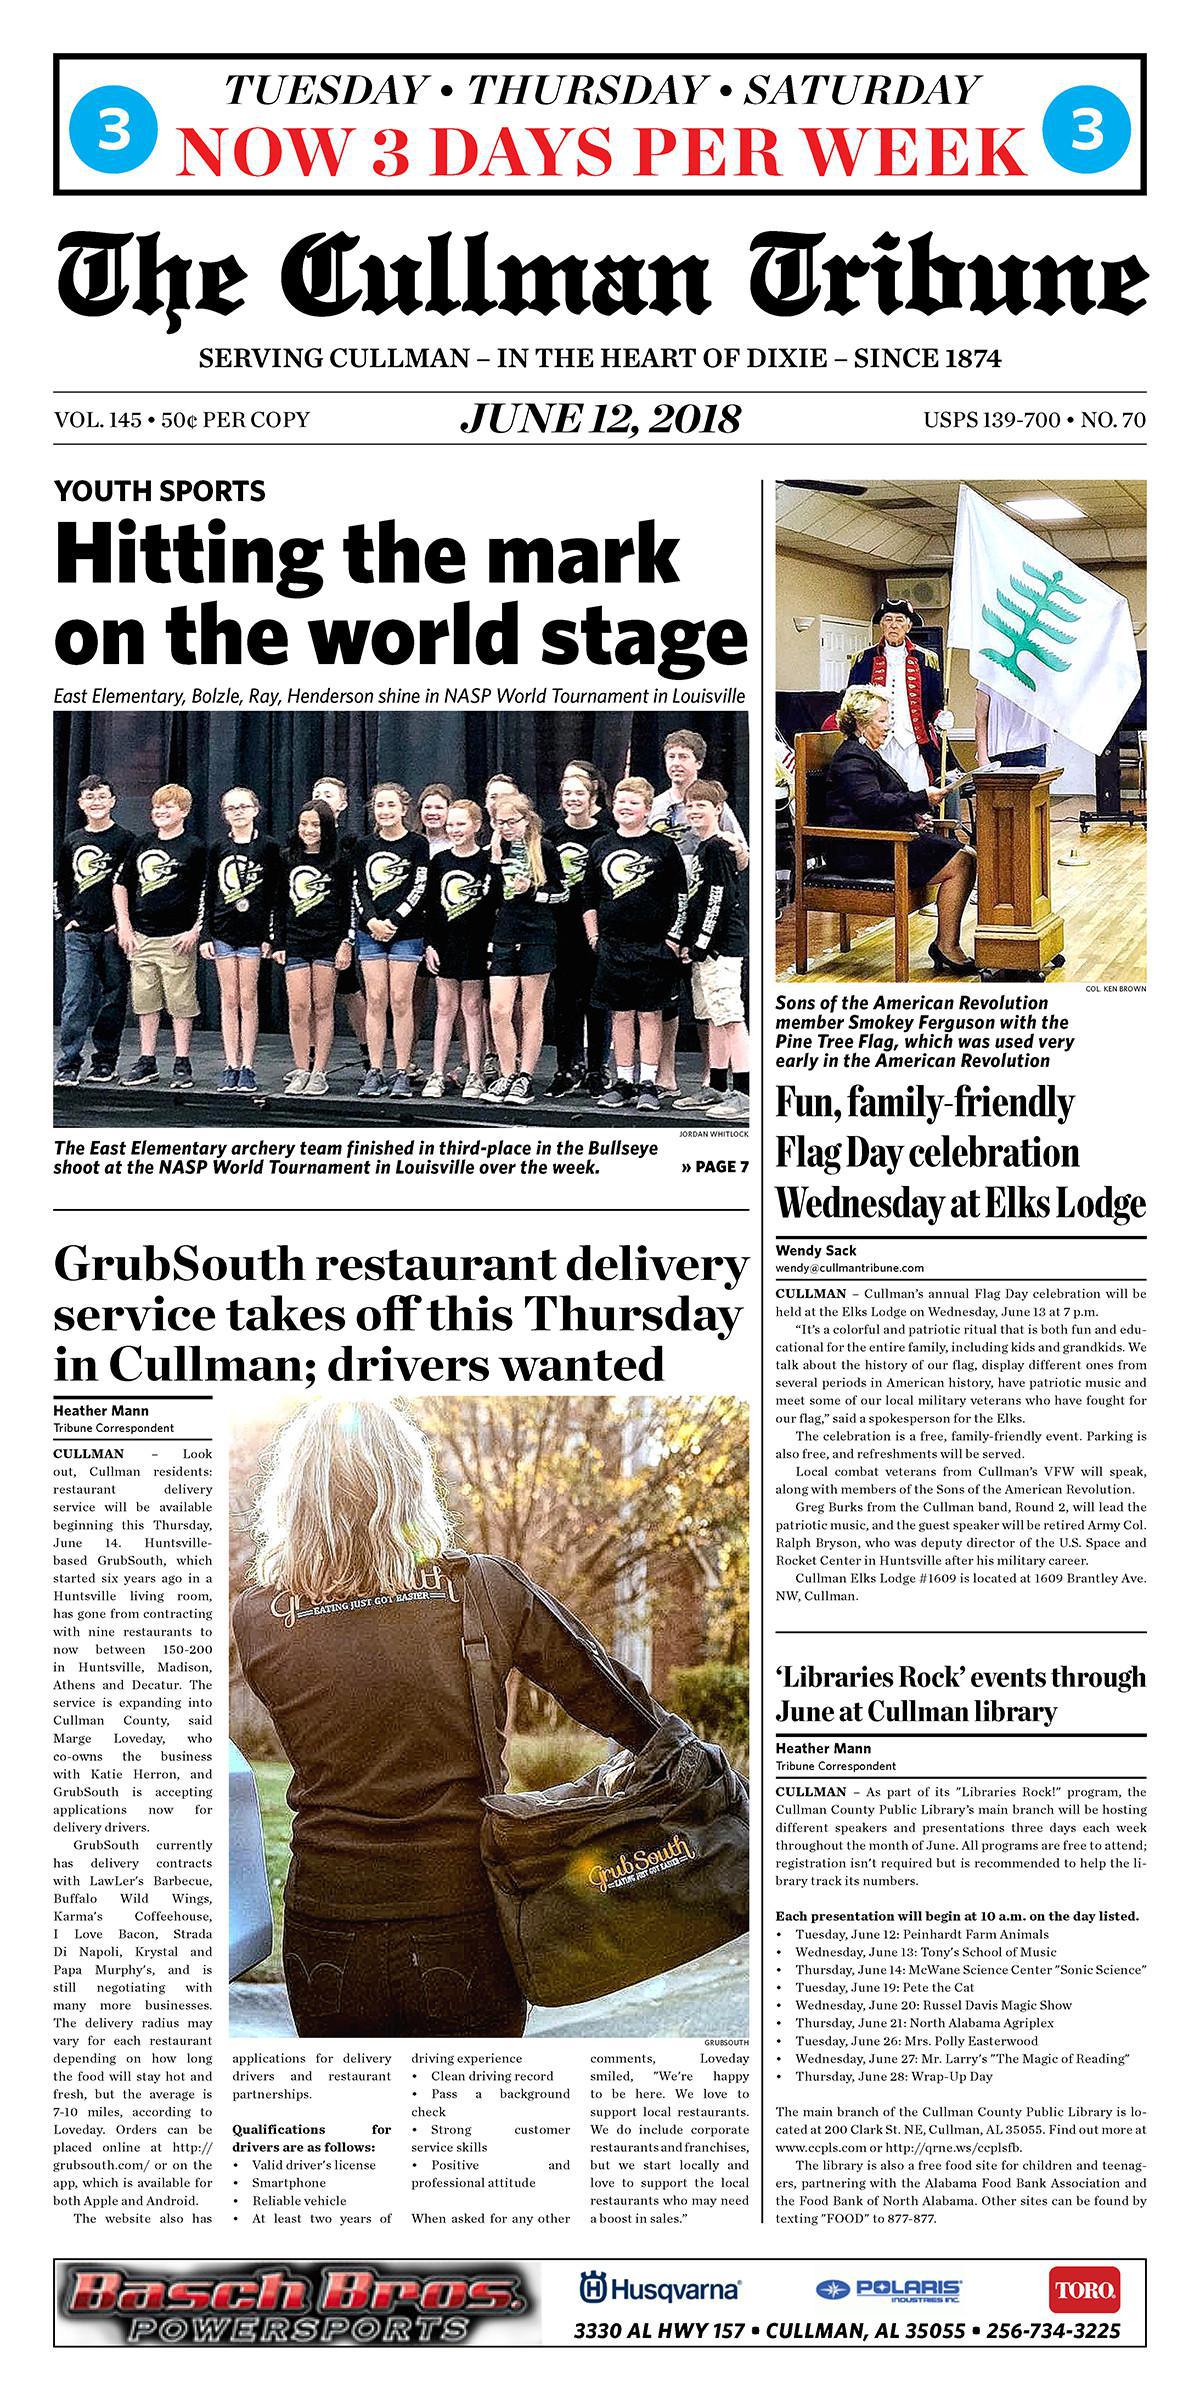 Good Morning Cullman! The 06-12-2018 edition of the Cullman Tribune is now ready to view